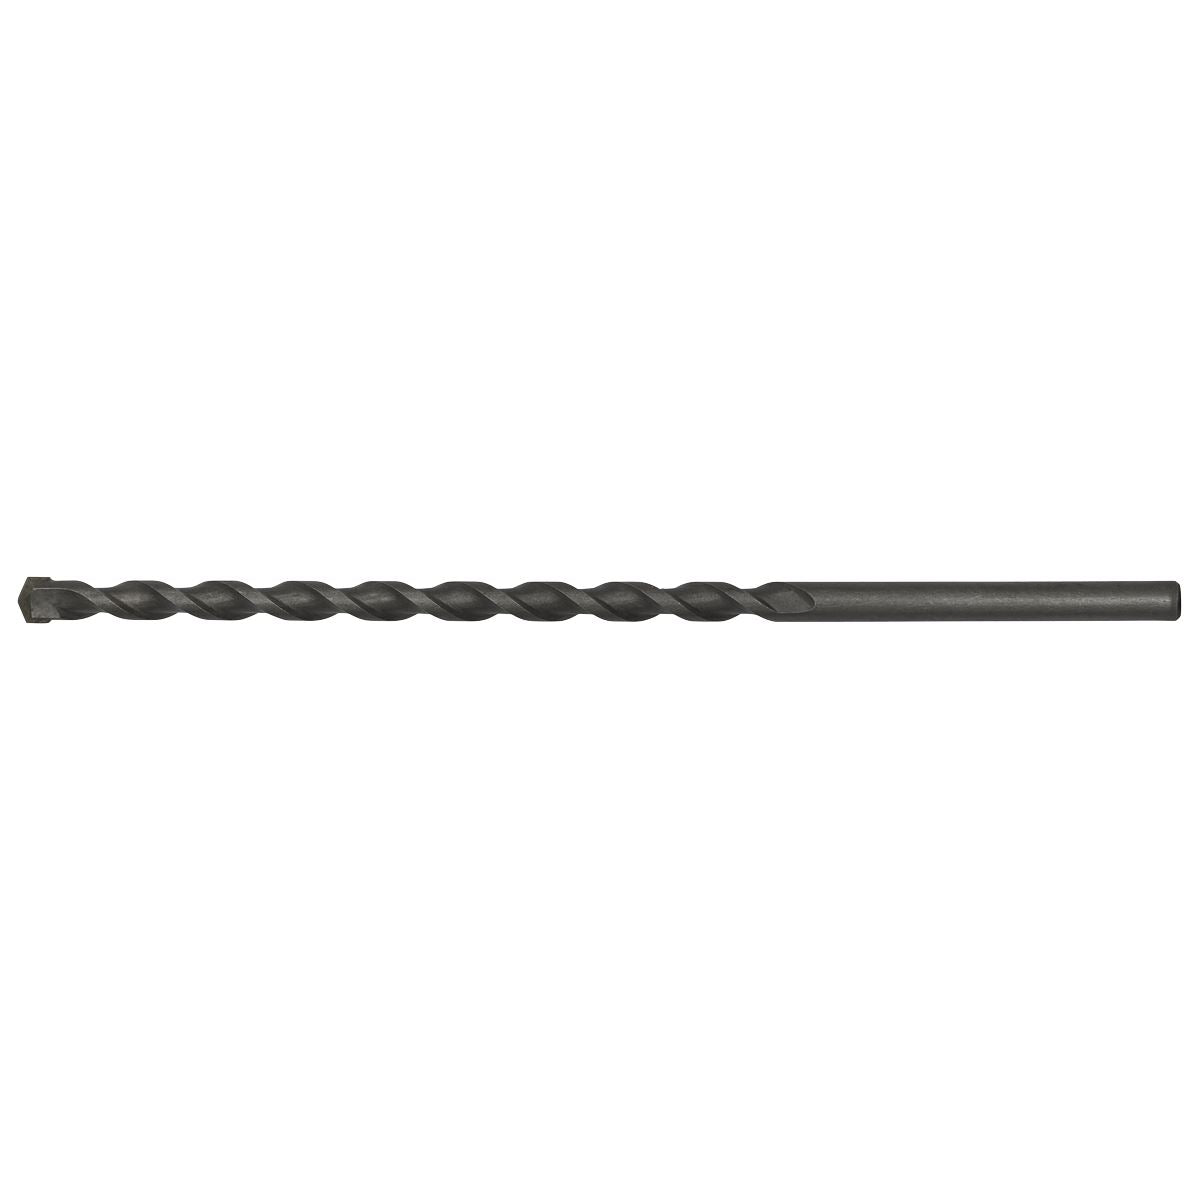 Worksafe by Sealey Straight Shank Rotary Impact Drill Bit Ø8 x 200mm